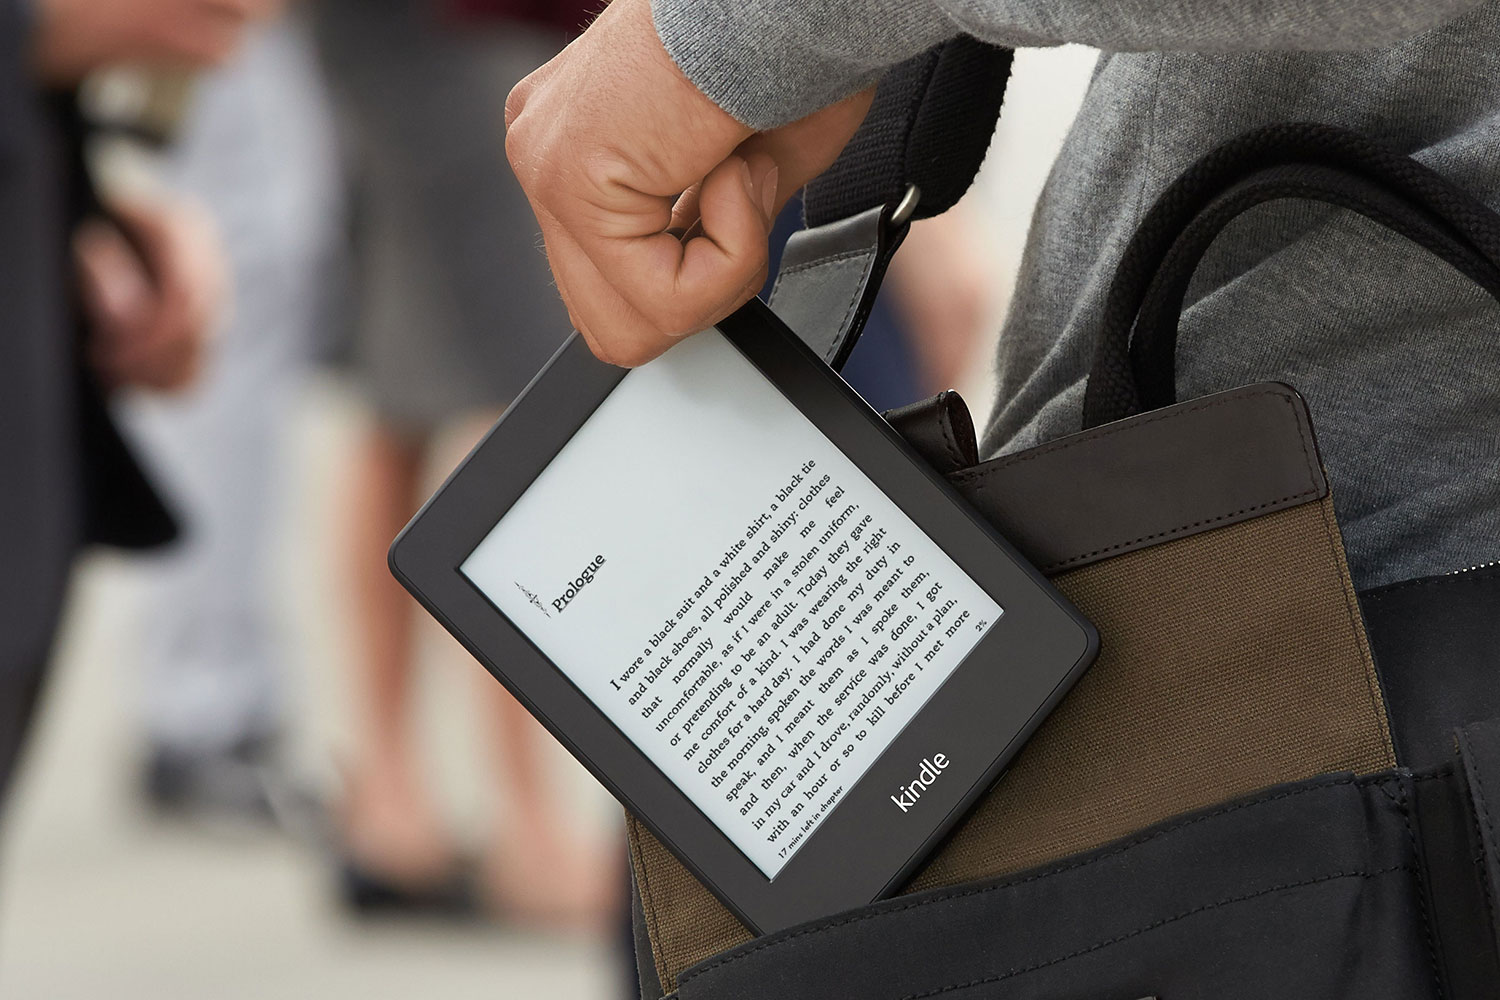 There’s still time to get 3 months of Kindle Unlimited for
